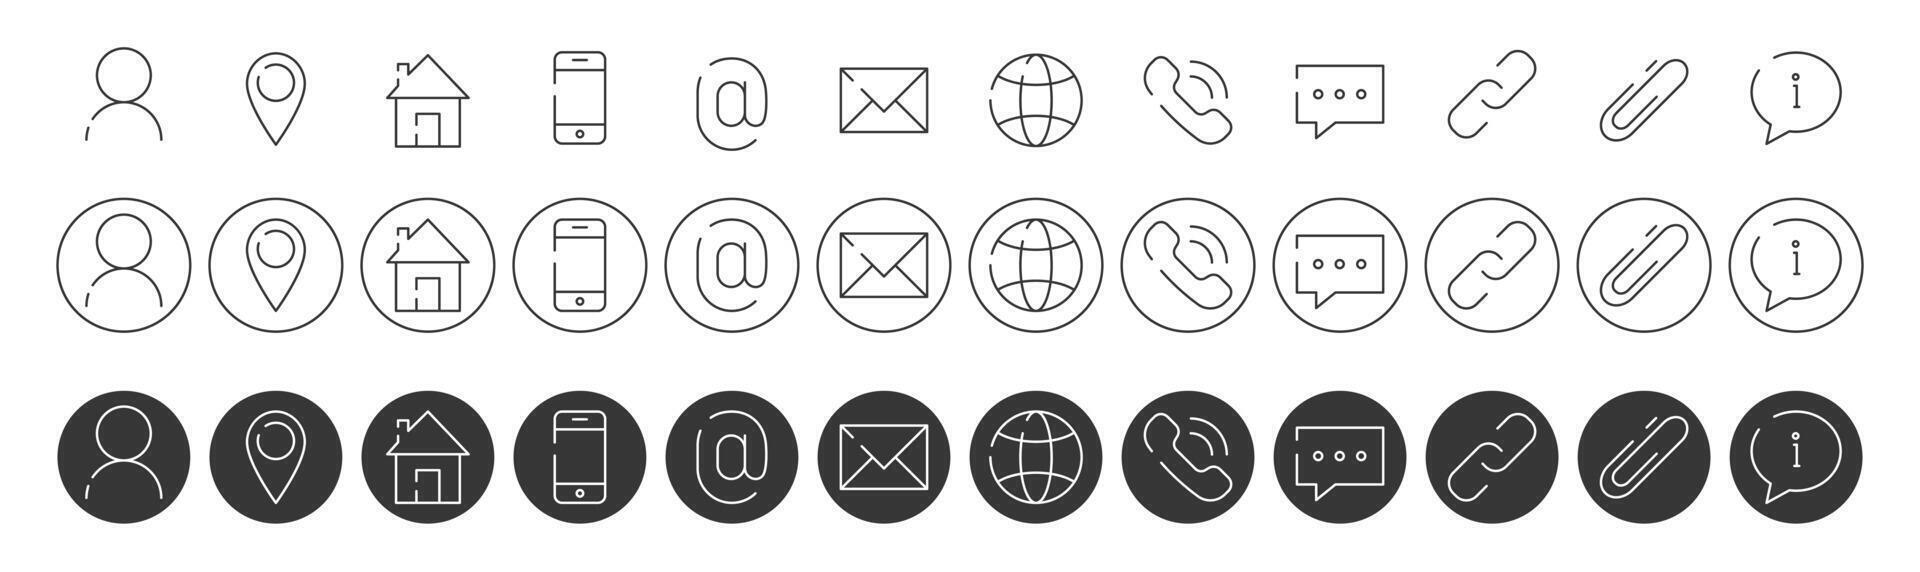 Web and mobile icon set, line style. Website contact info icons for registration, resume, highlights, design, social media. Chat, link, paper clip, message, phone, email, person. Vector illustration